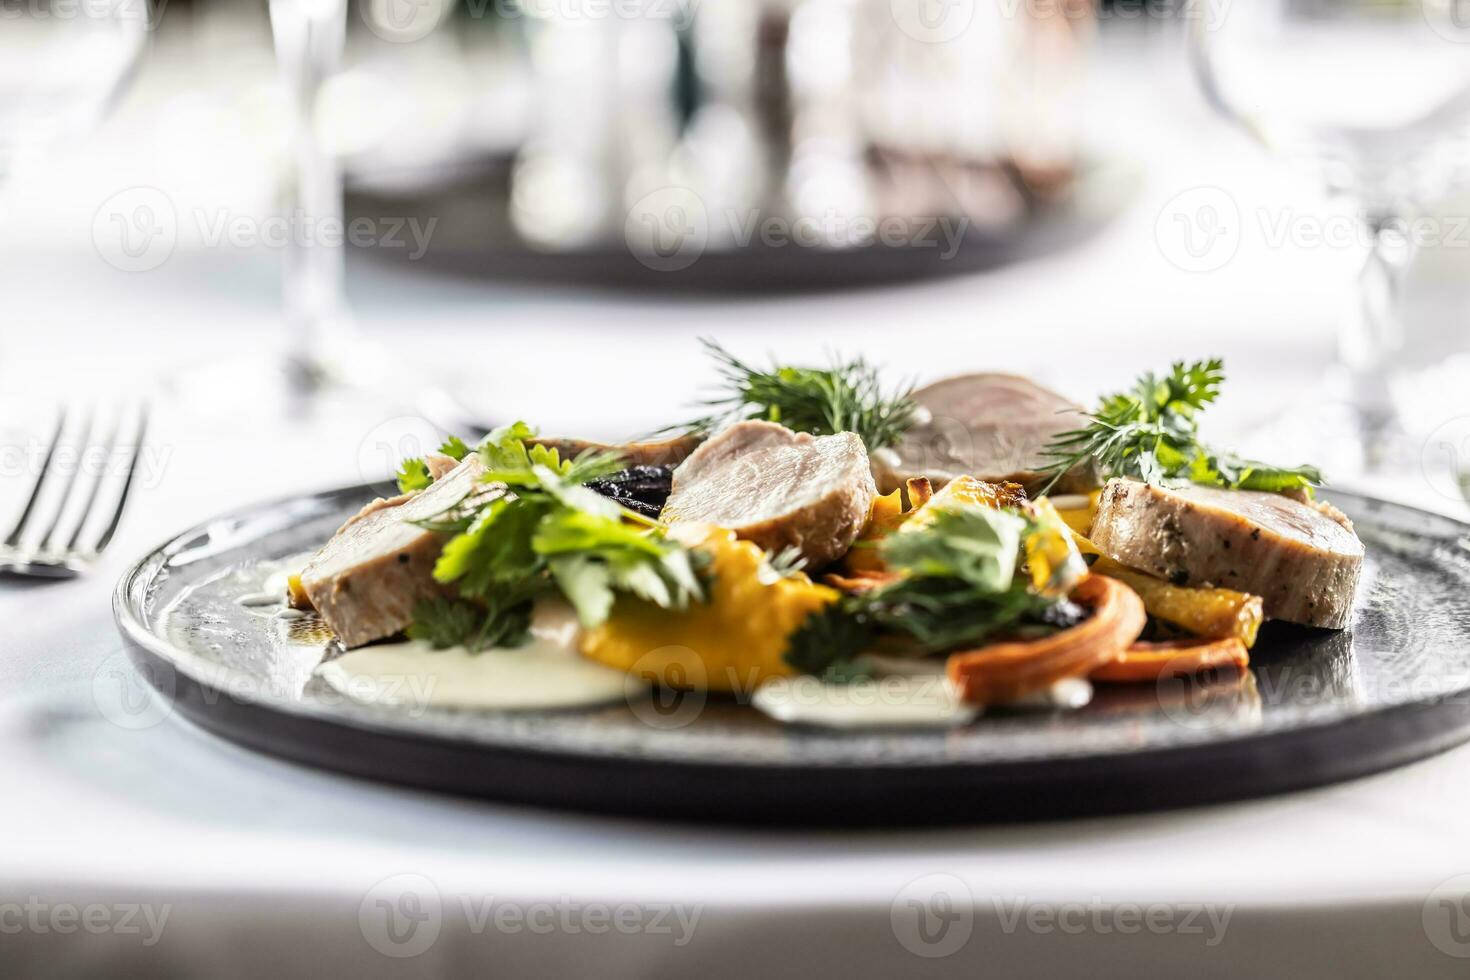 Baked pork and carrots with carrot puree and coriander leaves photo